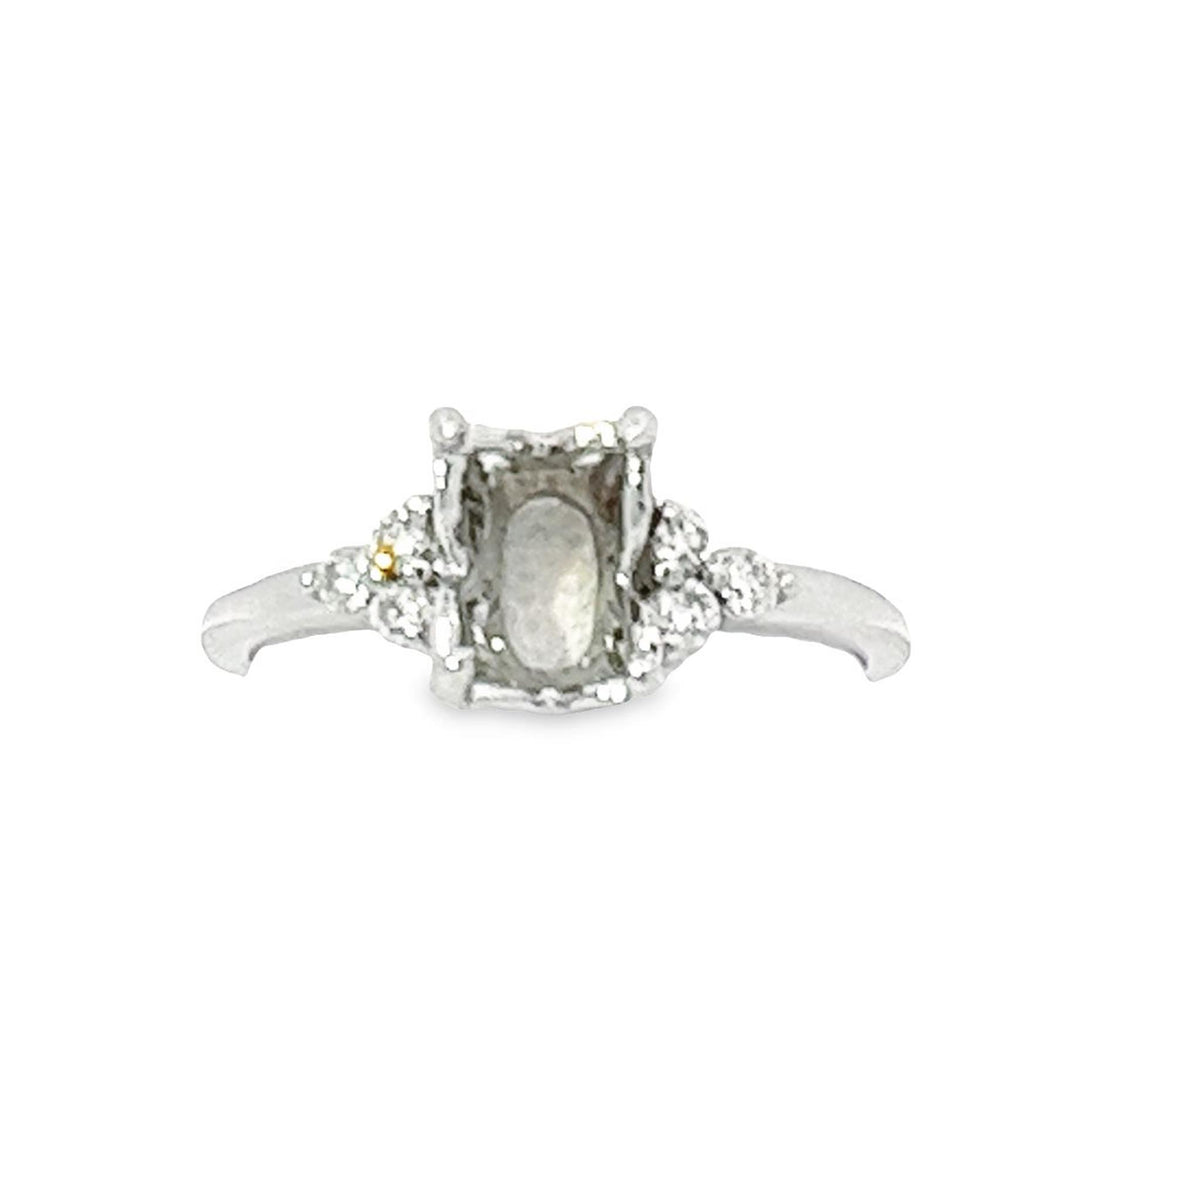 14Kt White Gold Engagement Ring with 3 Round Diamonds Each Side .18cttw